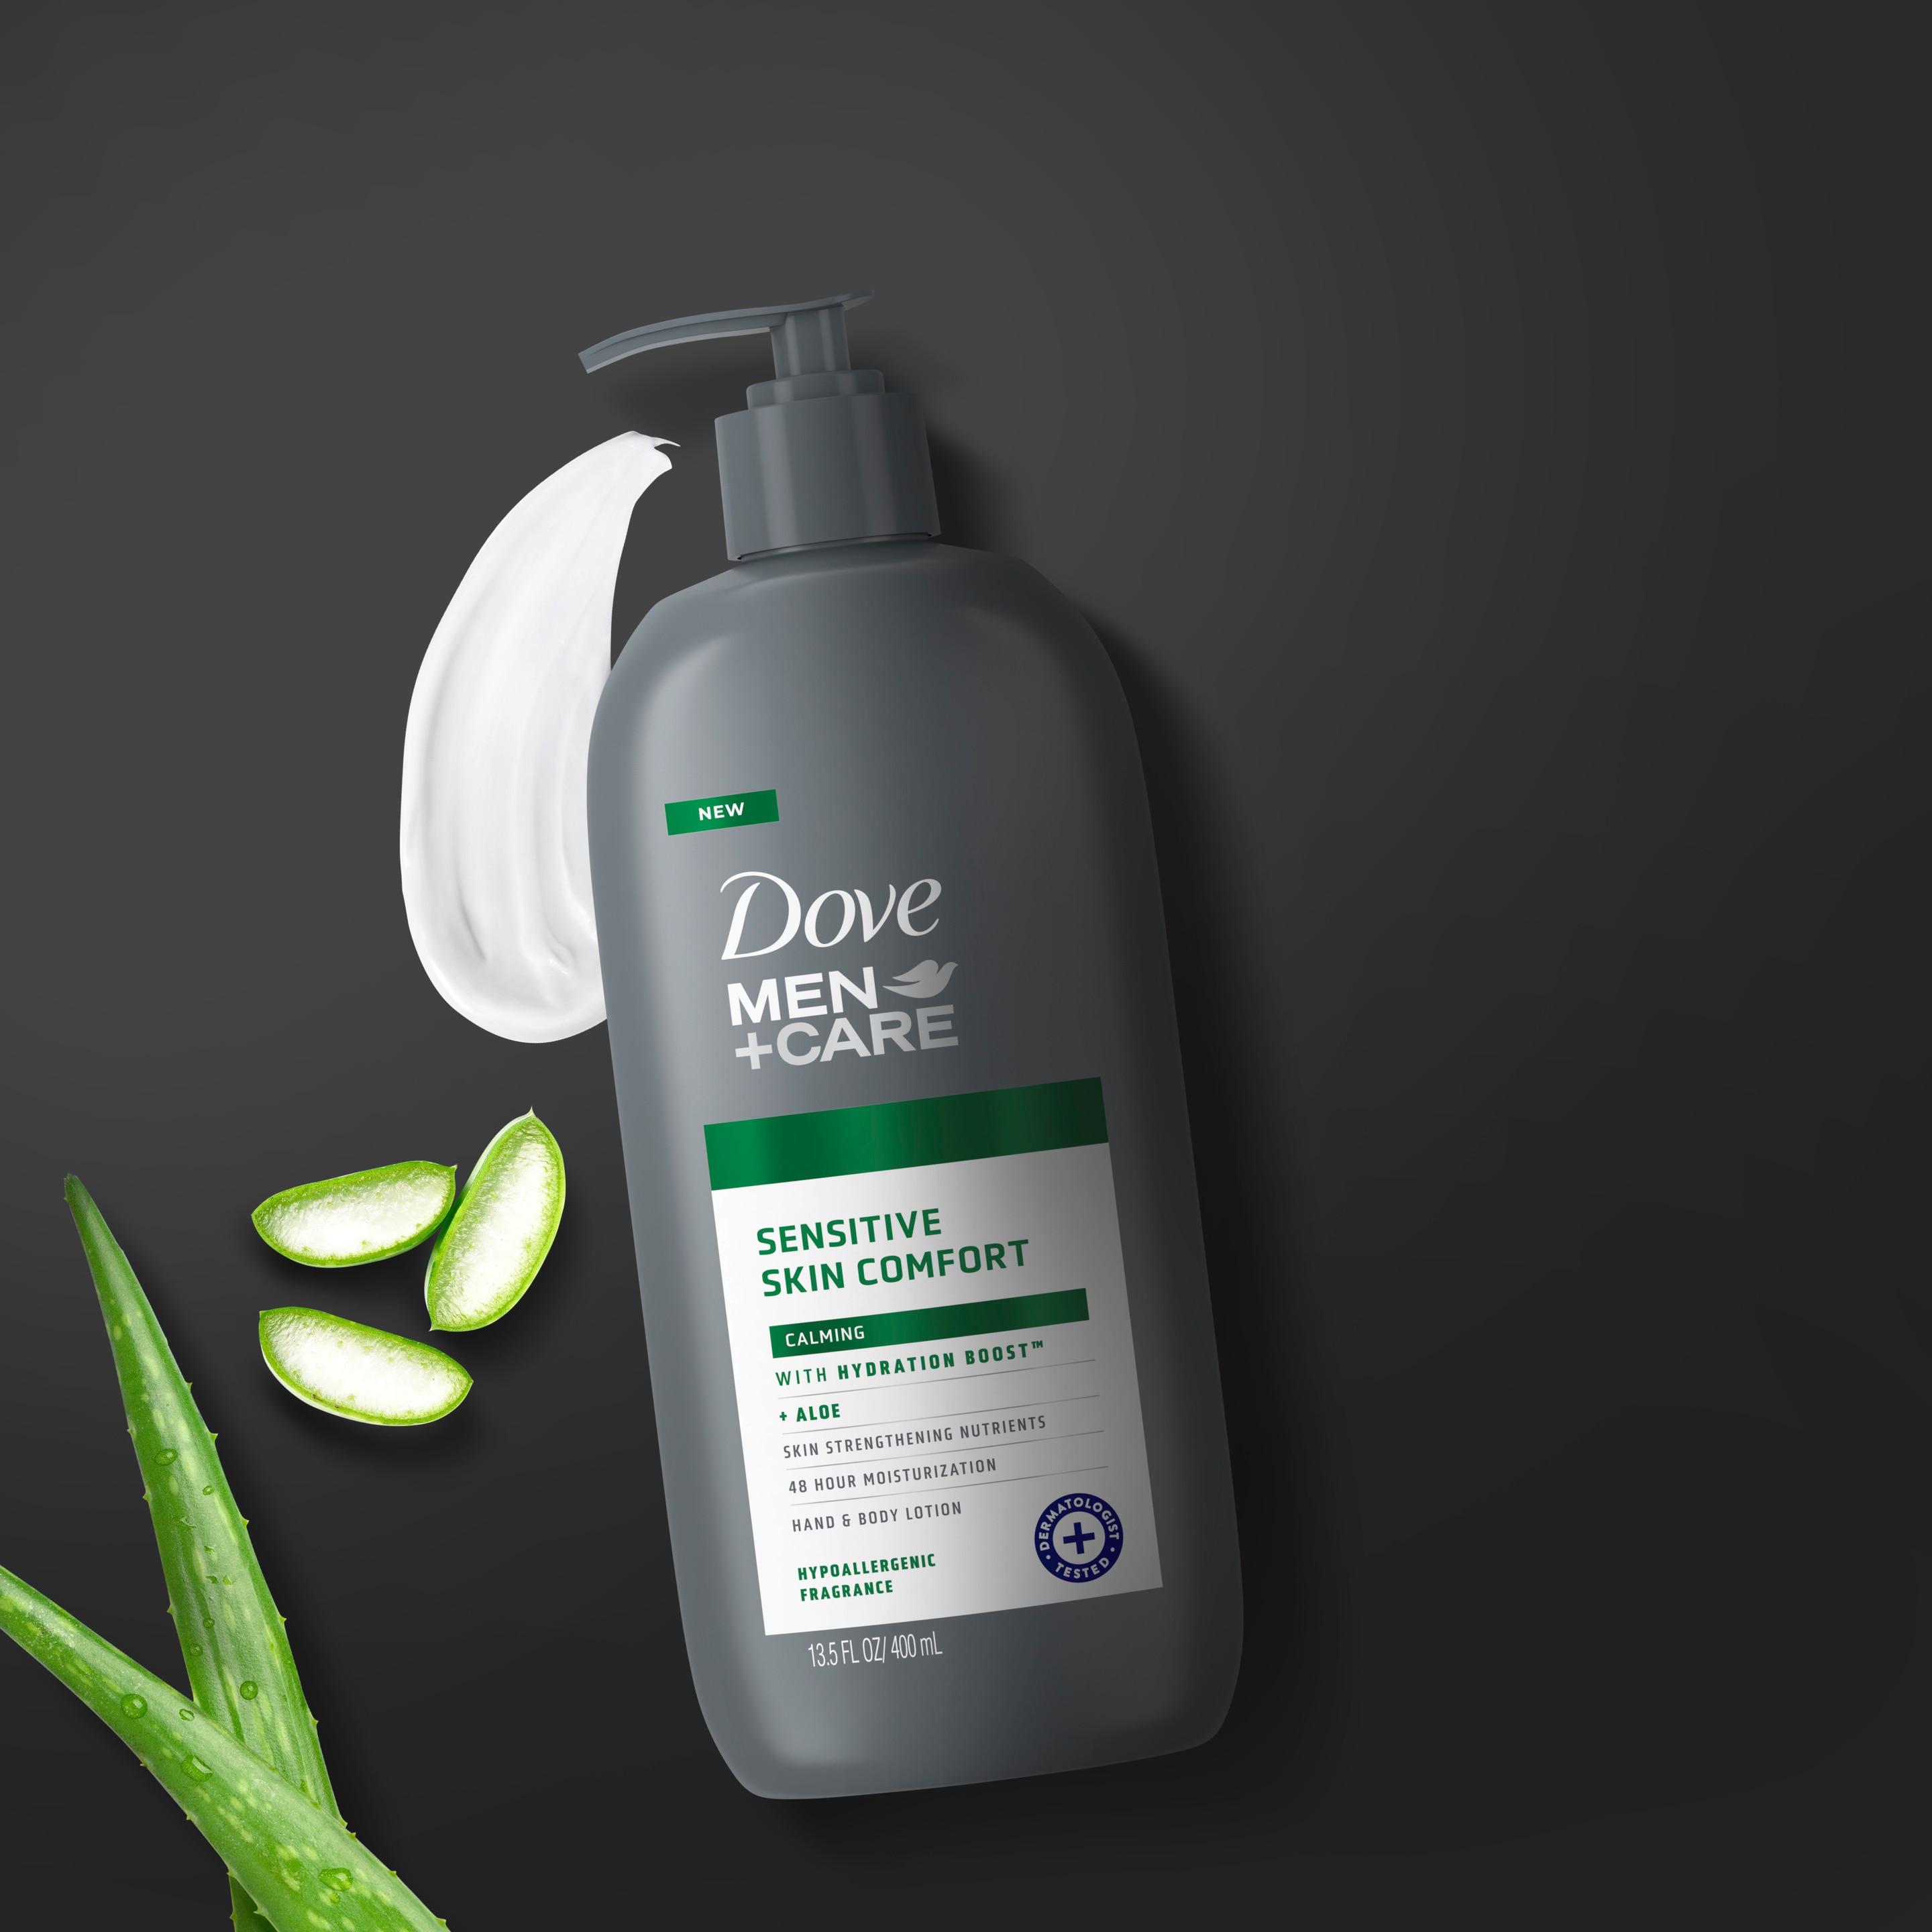 Dove Men+Care Hand and Body Lotion